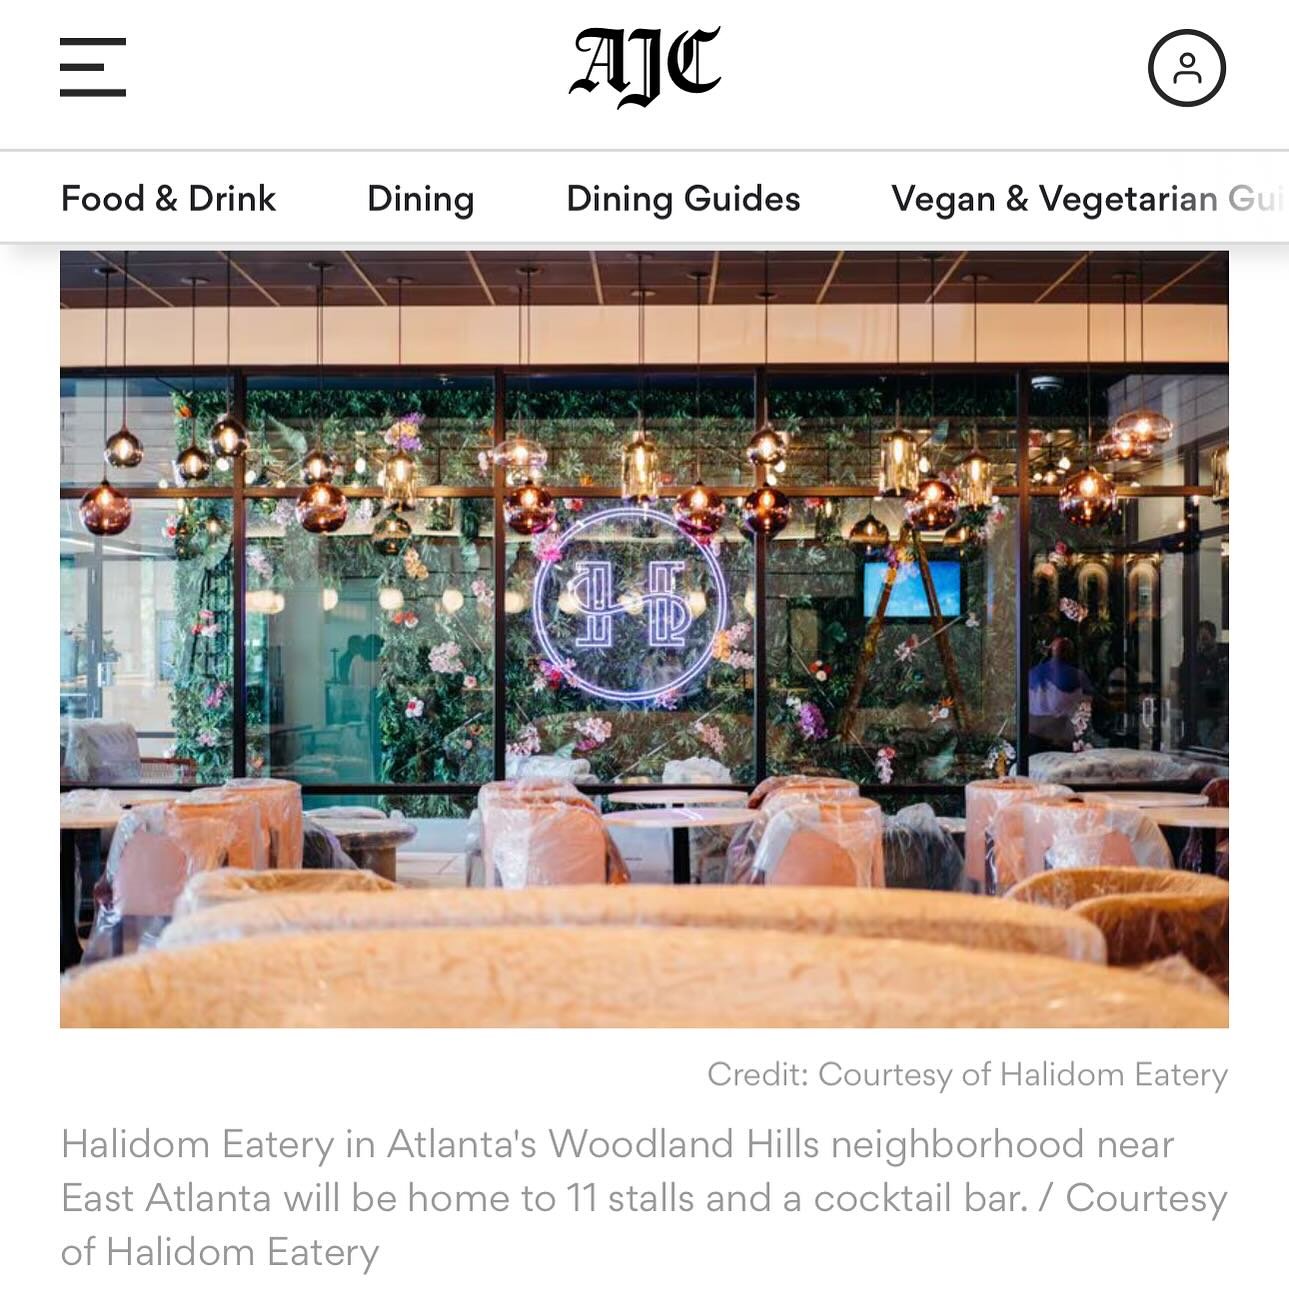 &ldquo;The grand opening weekend will feature live music 🎵, a build-a-bouquet bar for Mother&rsquo;s Day 🌷, and specials at cocktail bar Bar La Rose. 🍸✨&rdquo;
&zwnj;
Thank you @ajcdining for helping us spread the word about our GRAND OPENING on M